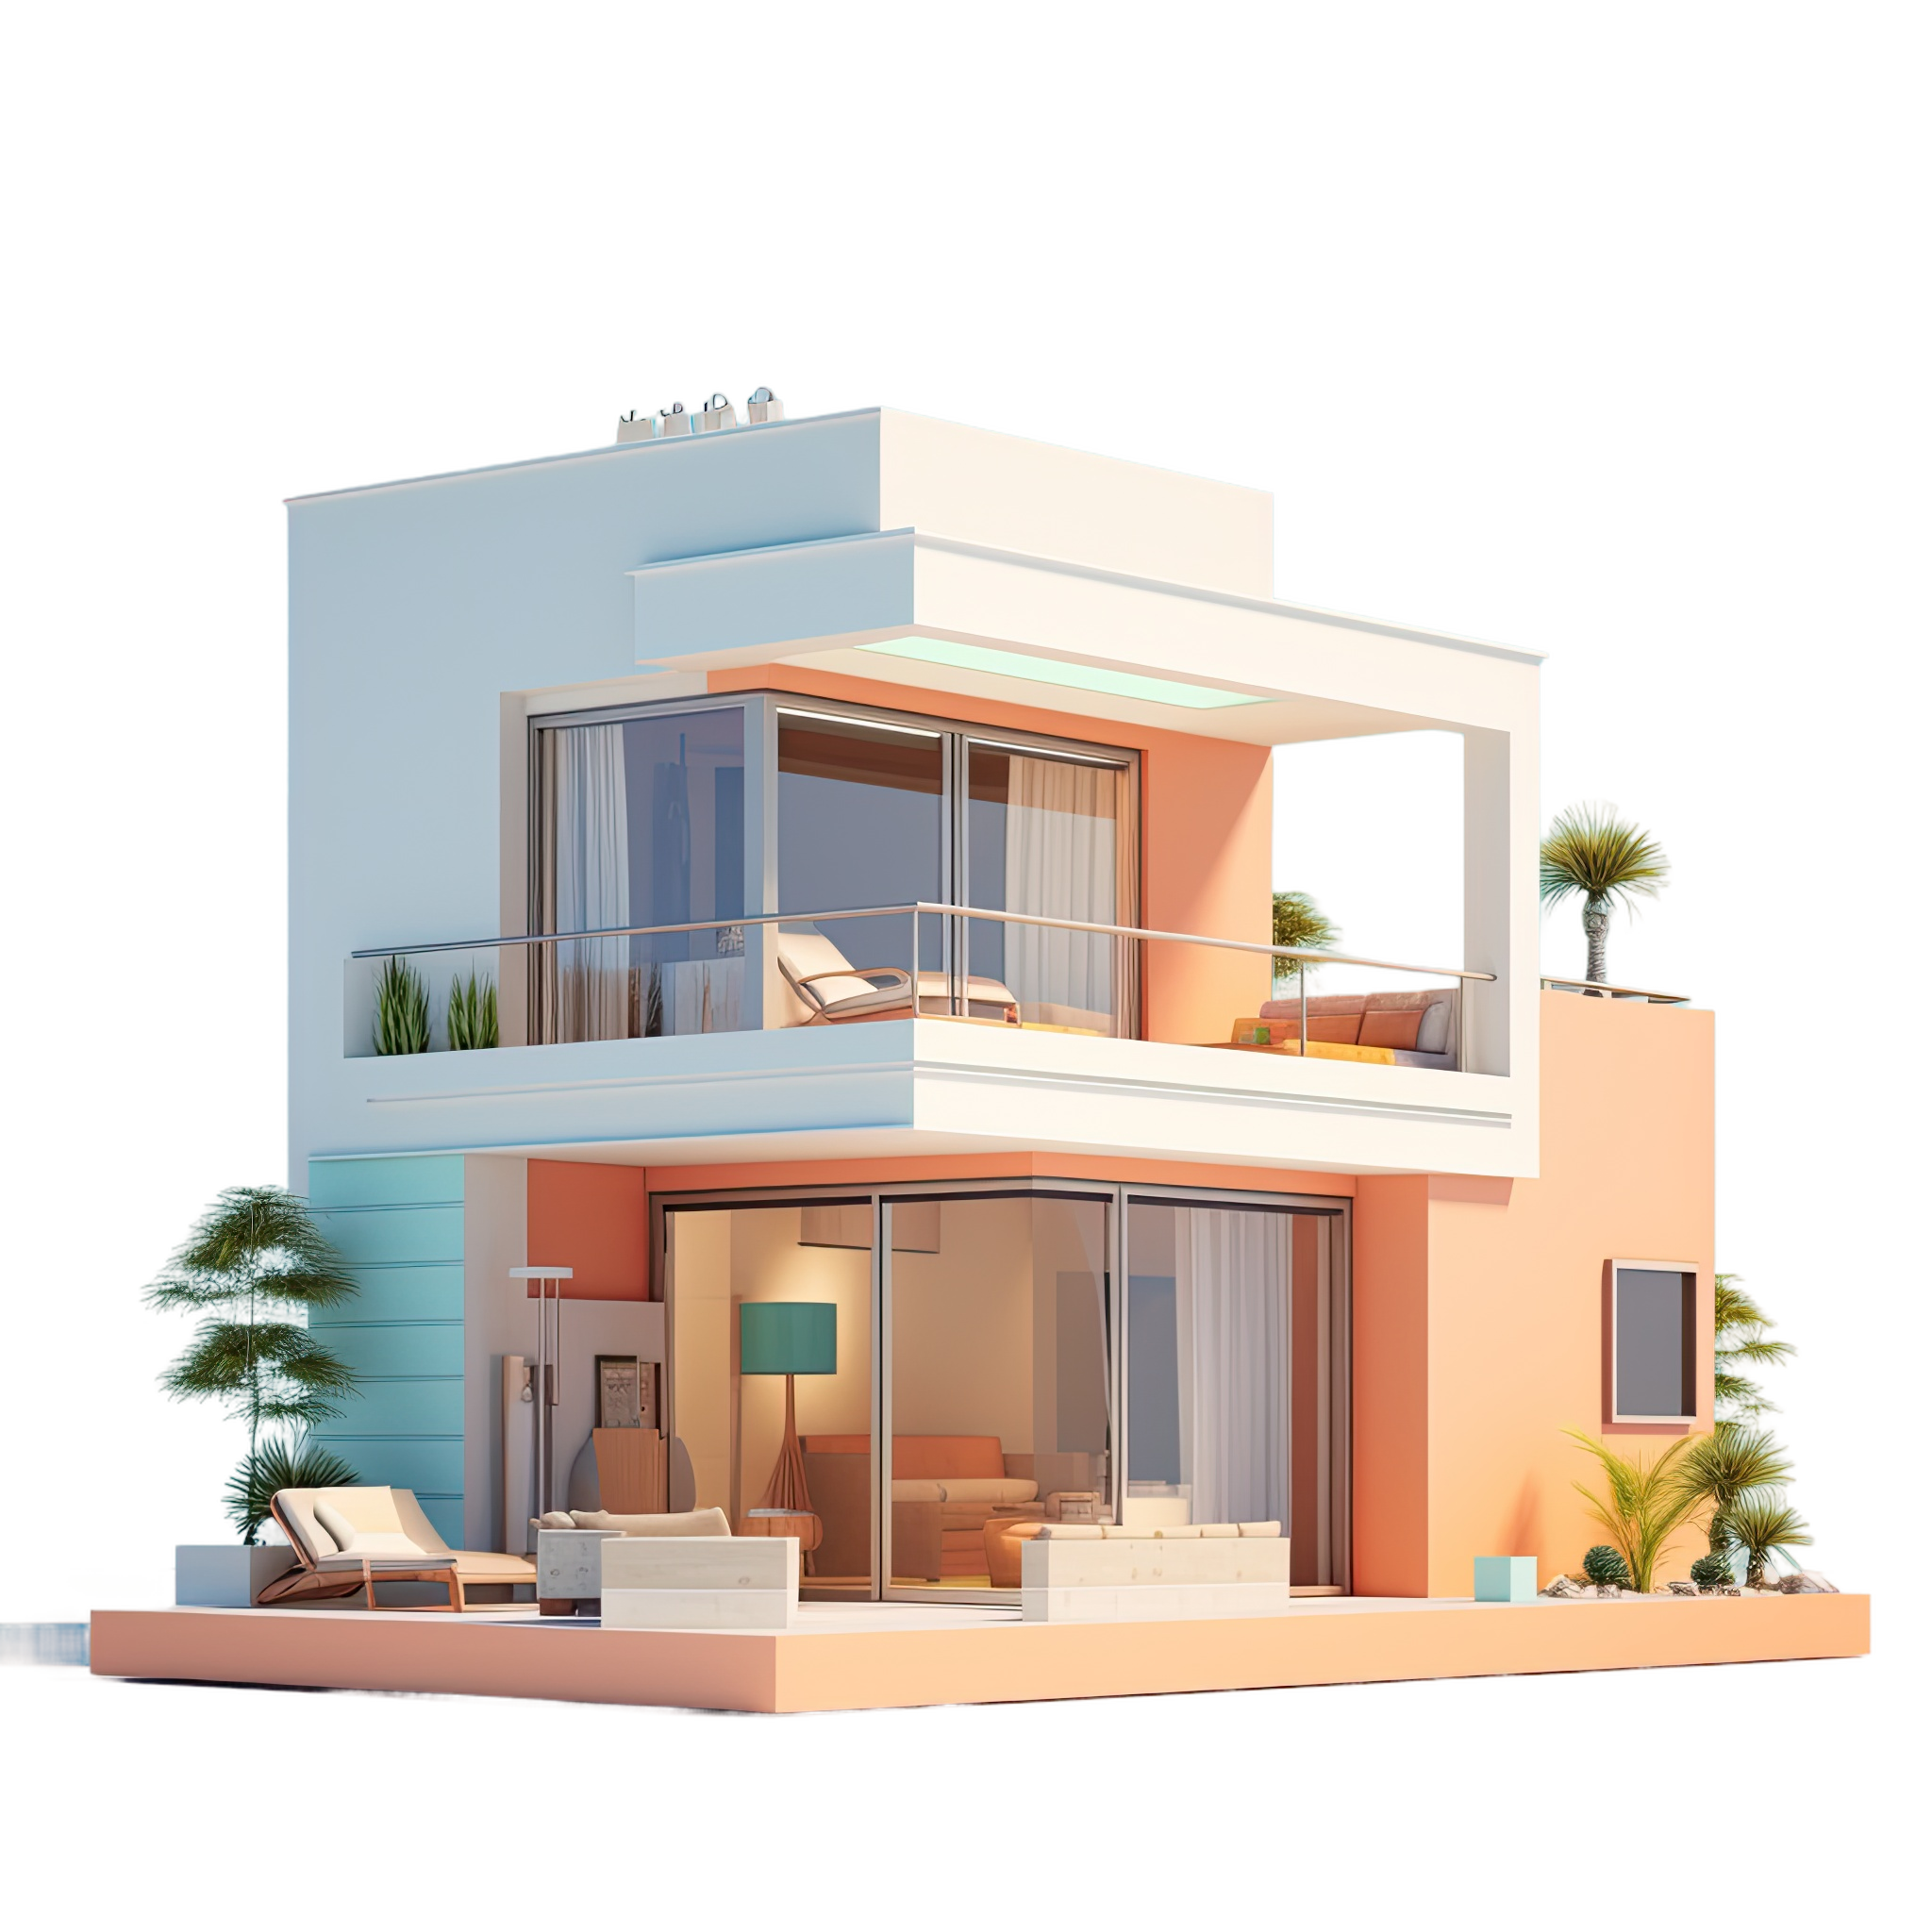 sthsn__Modern_house_concept_rendered_in_3D_for_real_estate_4